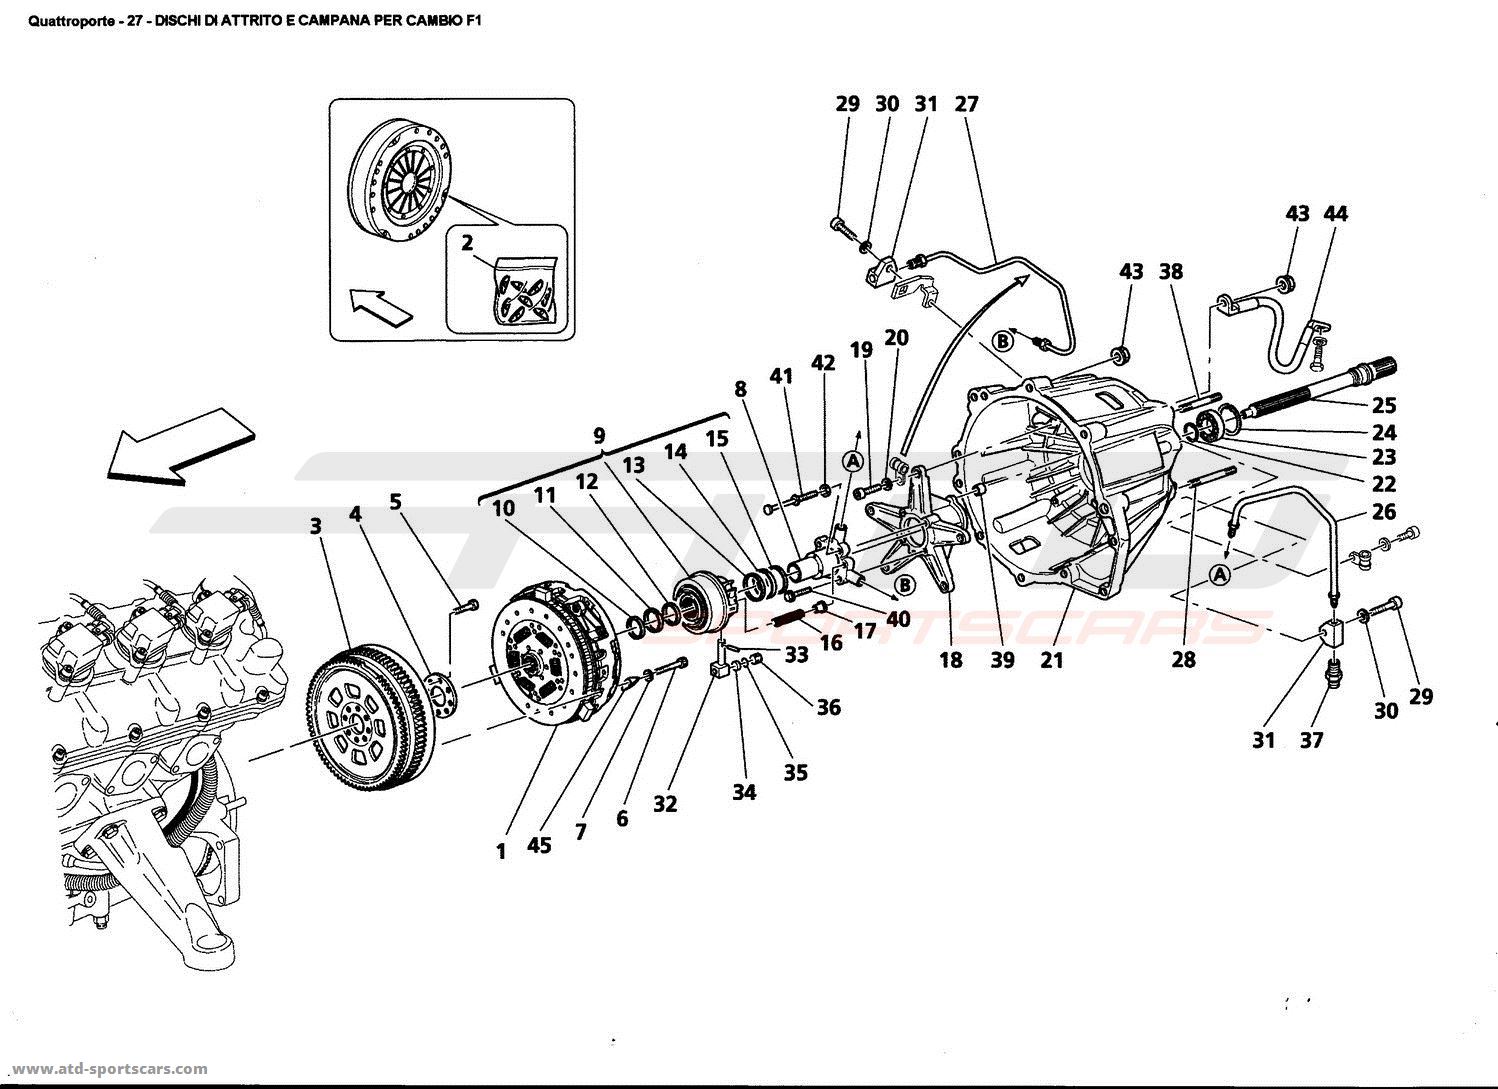 CLUTCH DISC AND HOUSING FOR F1 GEARBOX